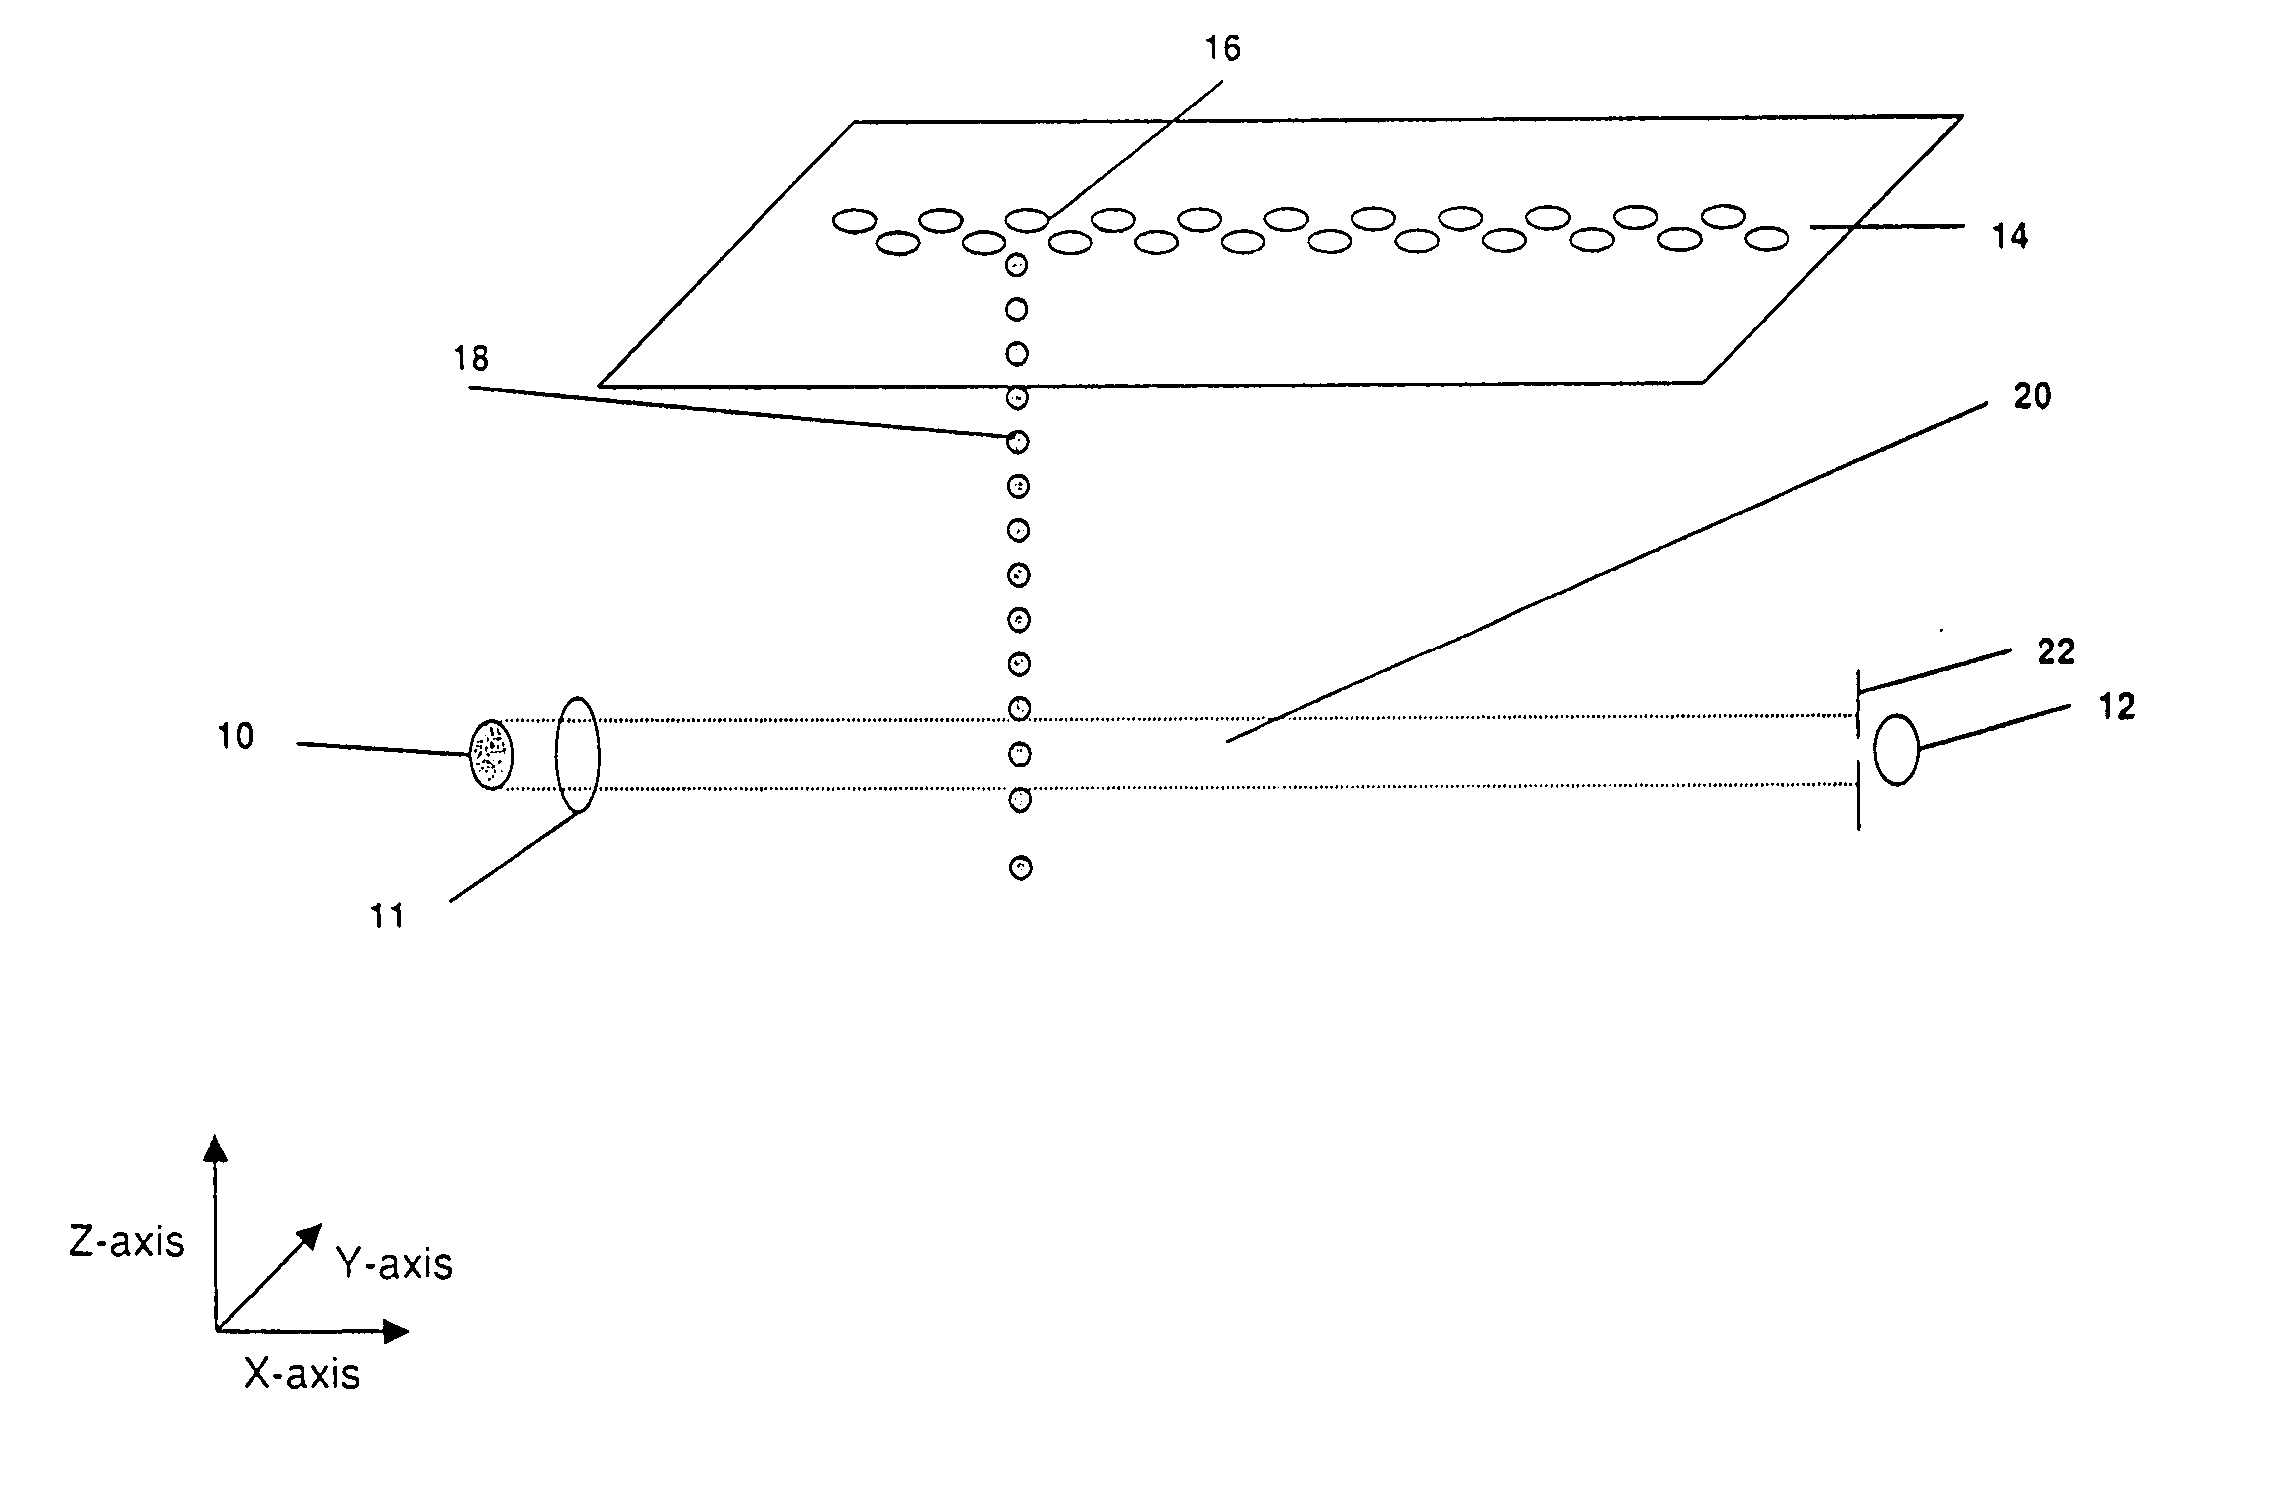 Apparatus and method for detection of liquid droplets